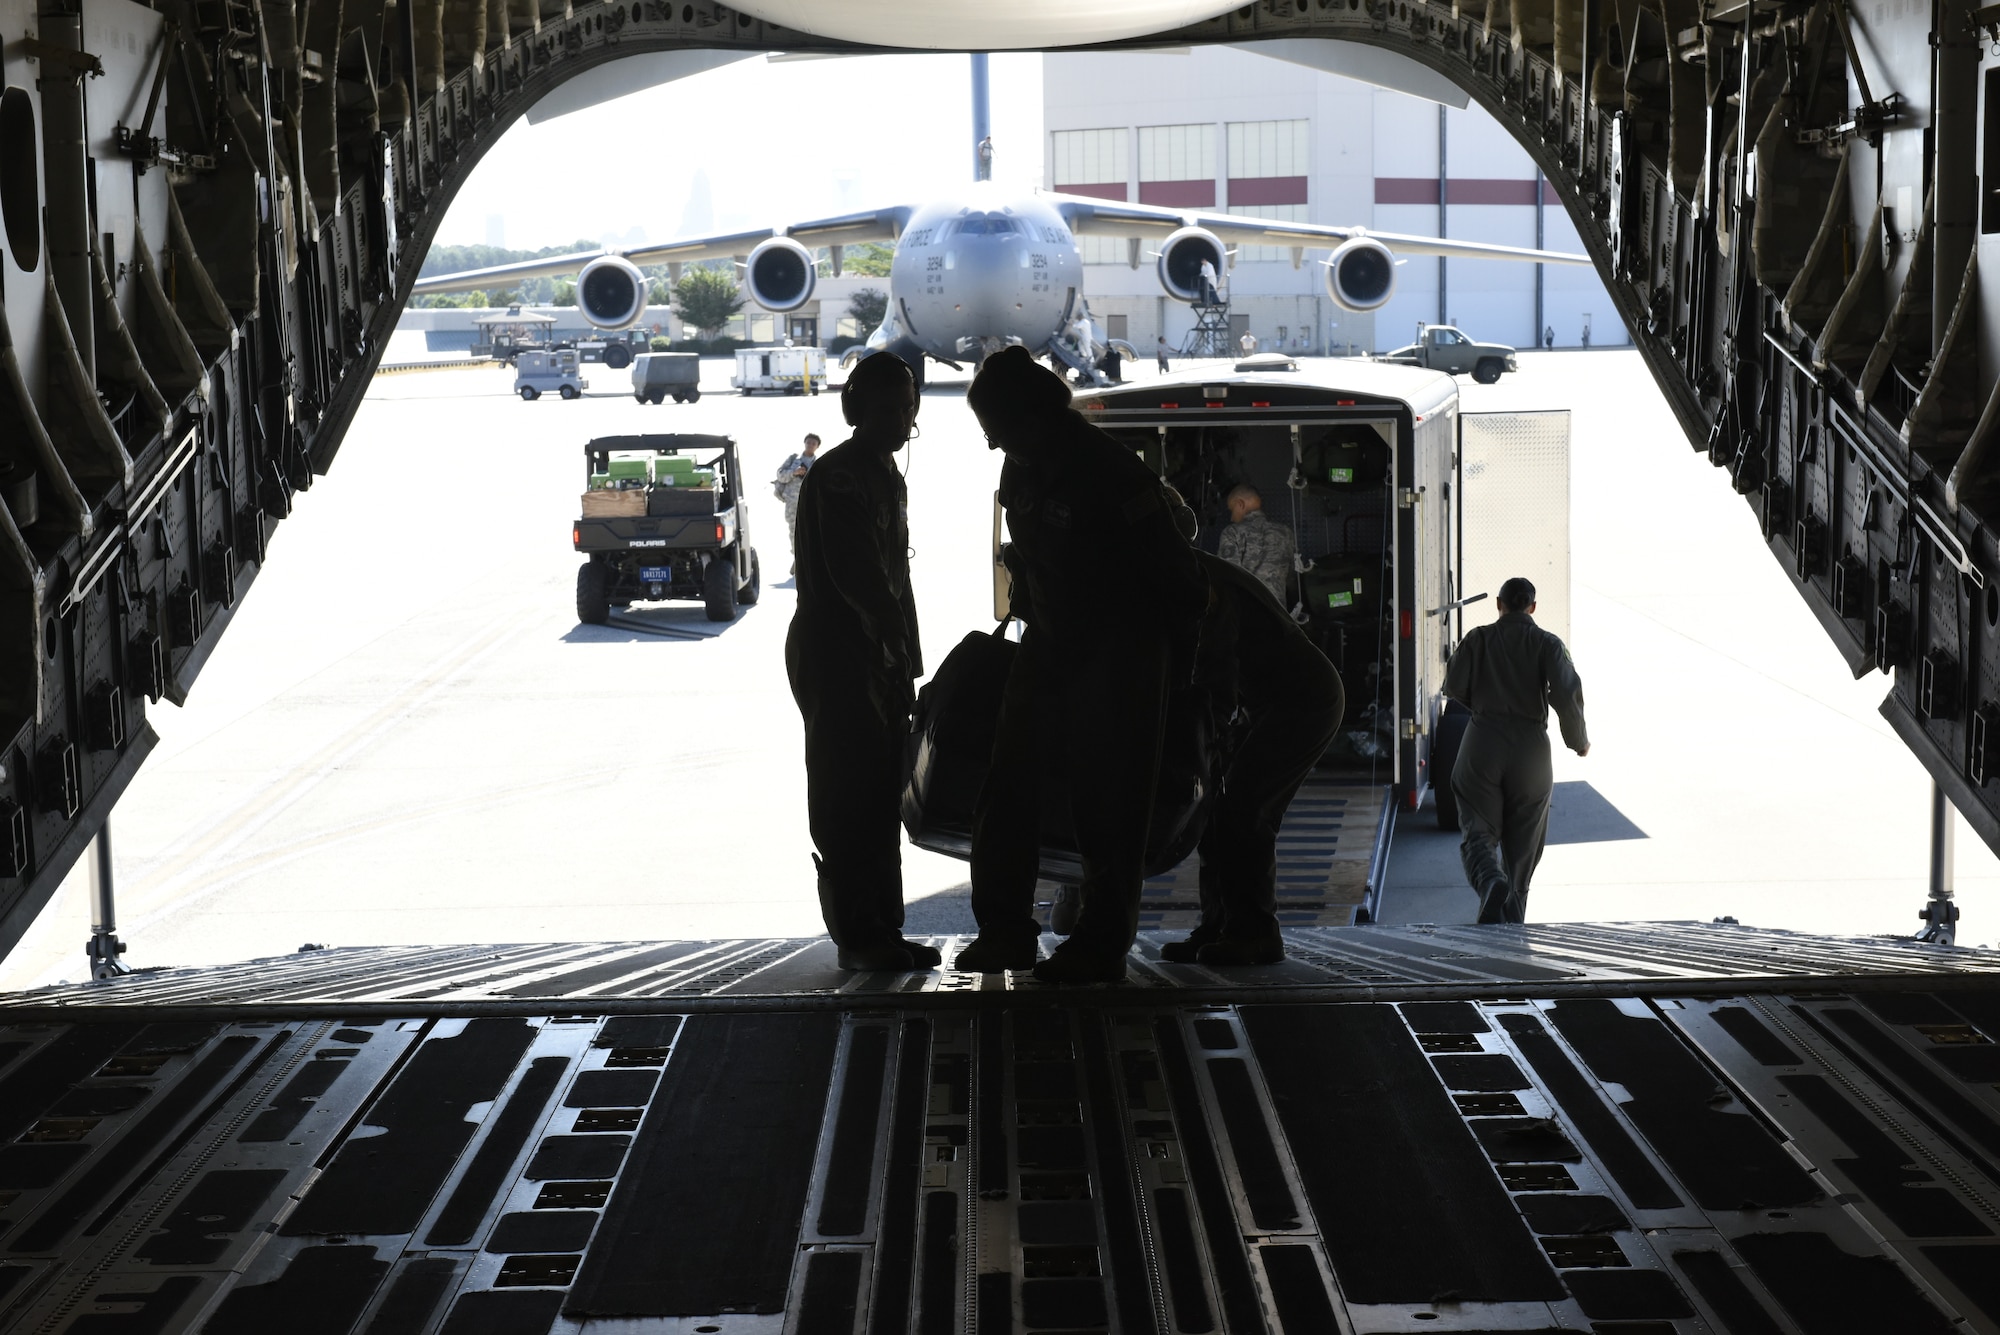 Airmen from the 156th Aeromedical Evacuation Squadron load medical equipment aboard a C-17 Globemaster III aircraft, for transport from North Carolina Air National Guard Base, Charlotte Douglas International Airport to Volk Field Air National Guard Base, Wisconsin, for a training exercise, July 9, 2018. (U.S. Air Force photo by Tech. Sgt. Nathan Clark)